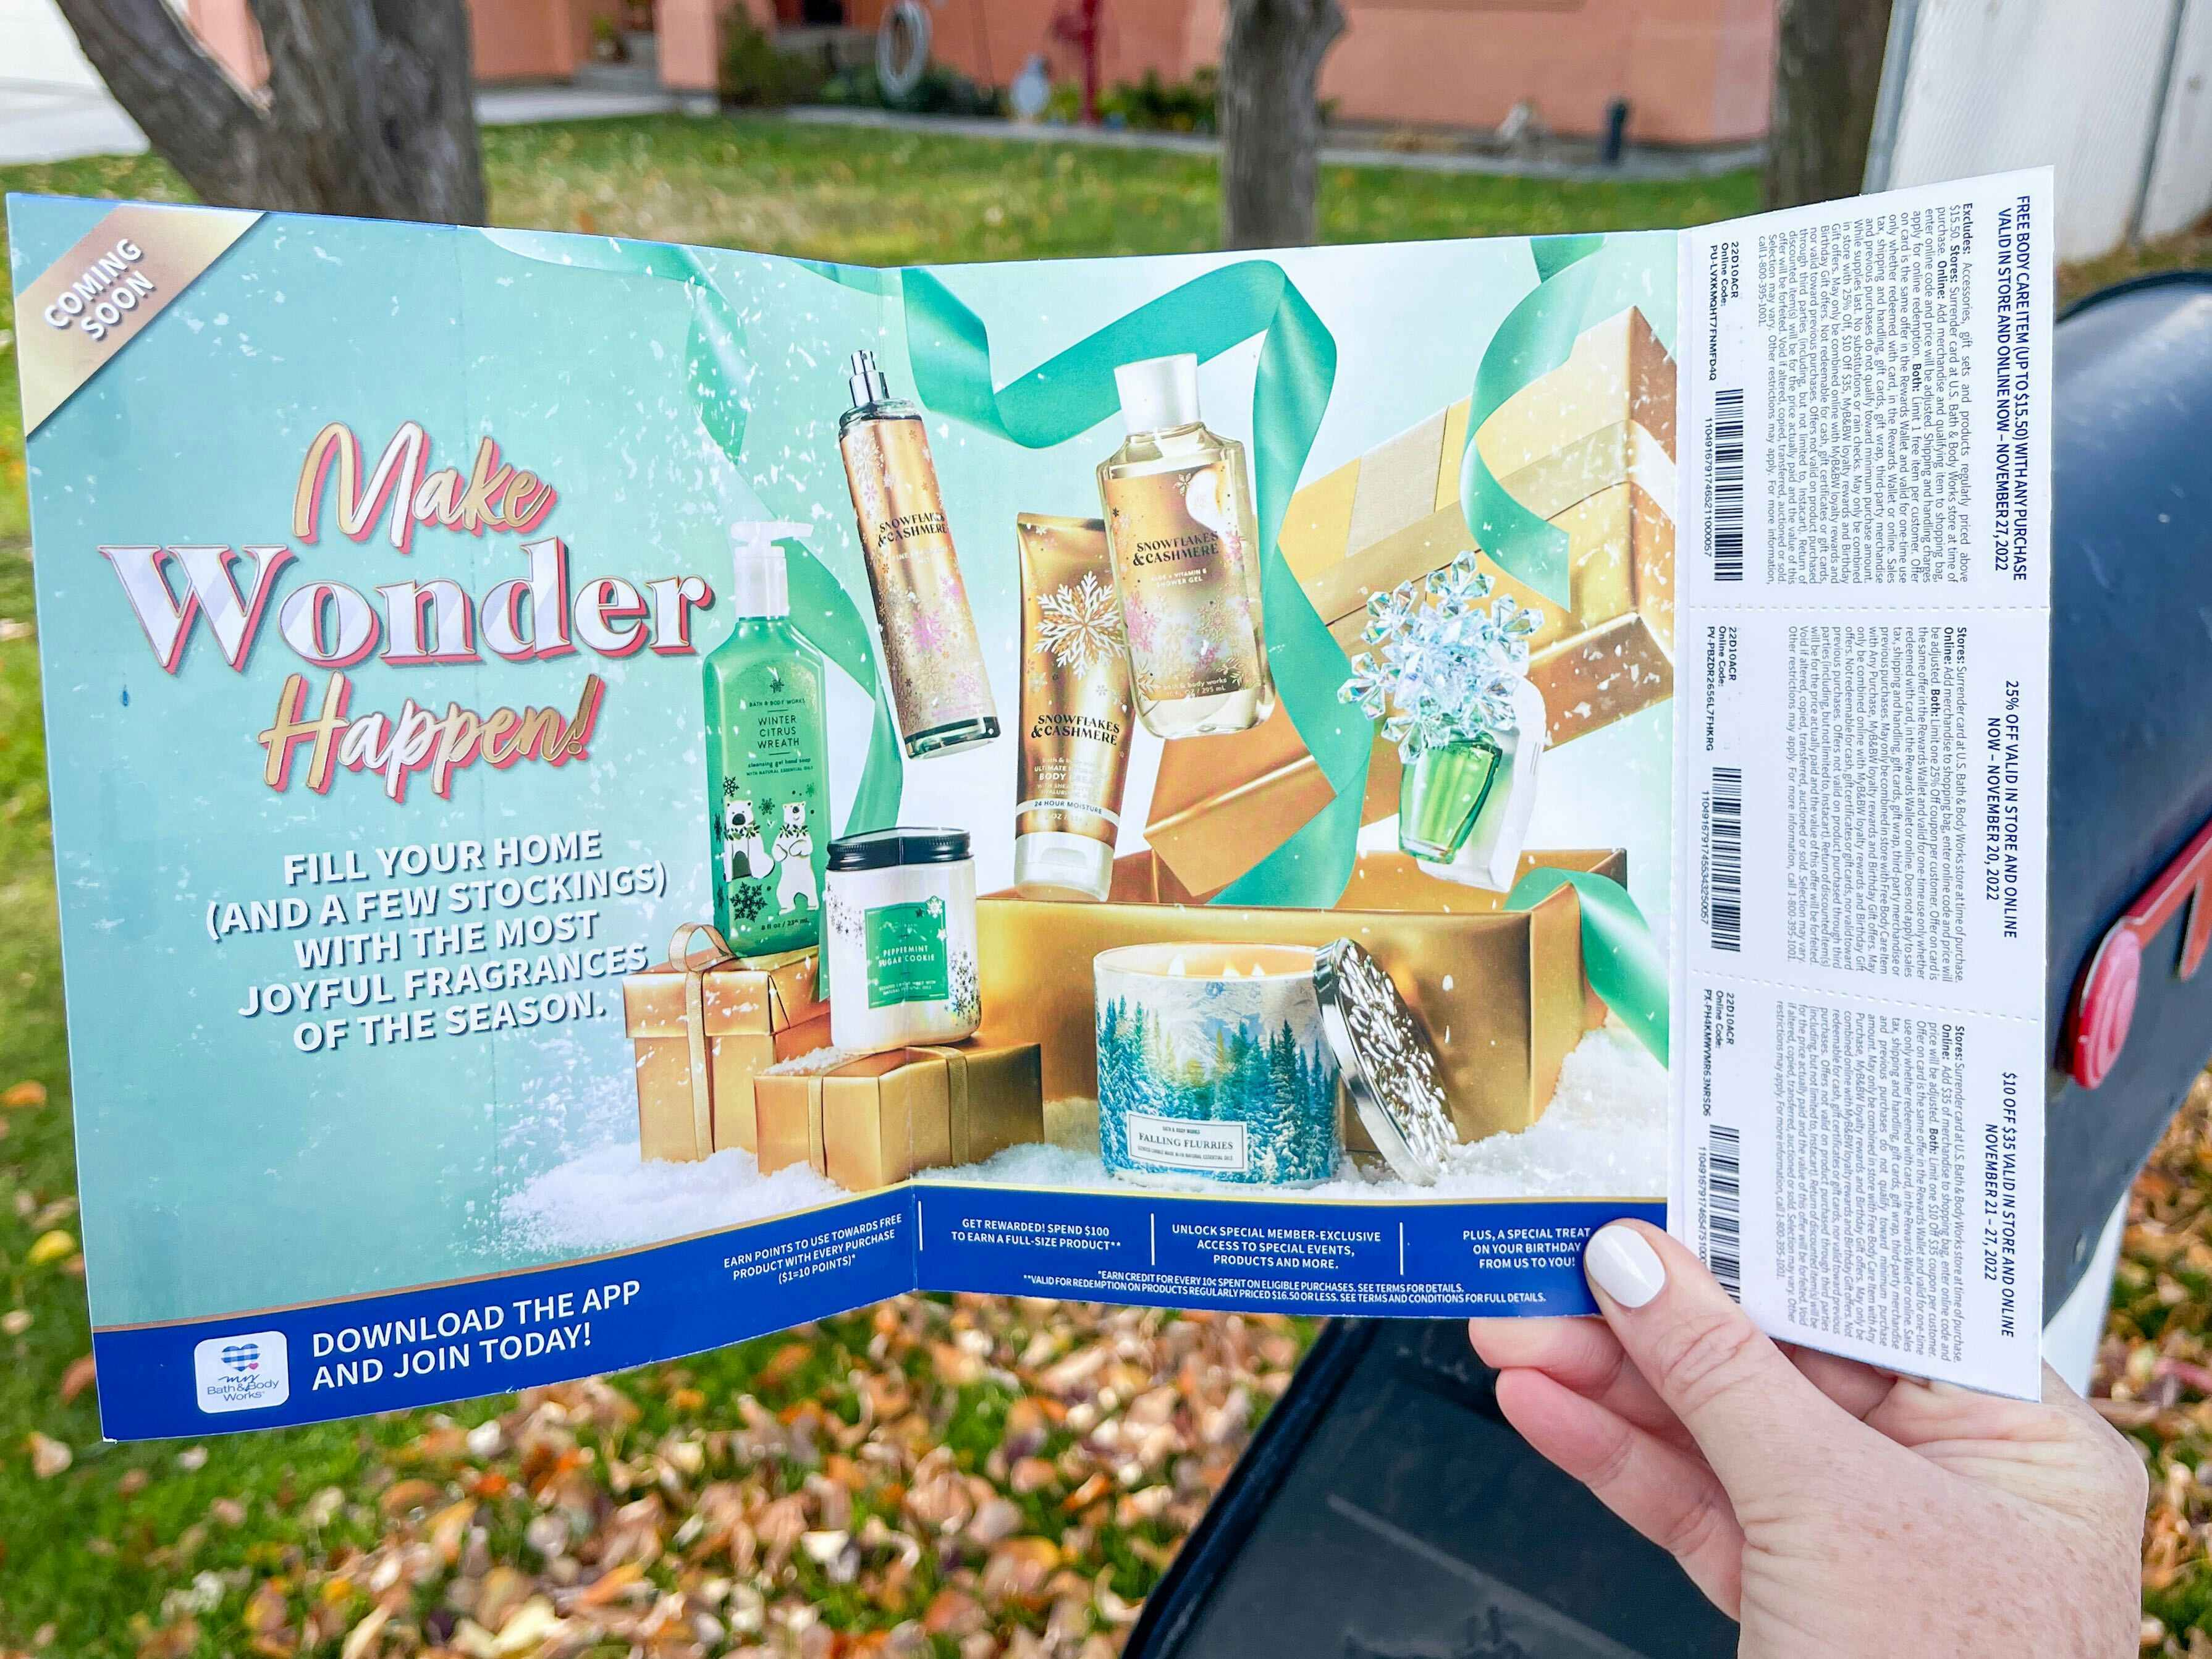 A person holding a Bath & Body Works coupon mailer next to a mail box